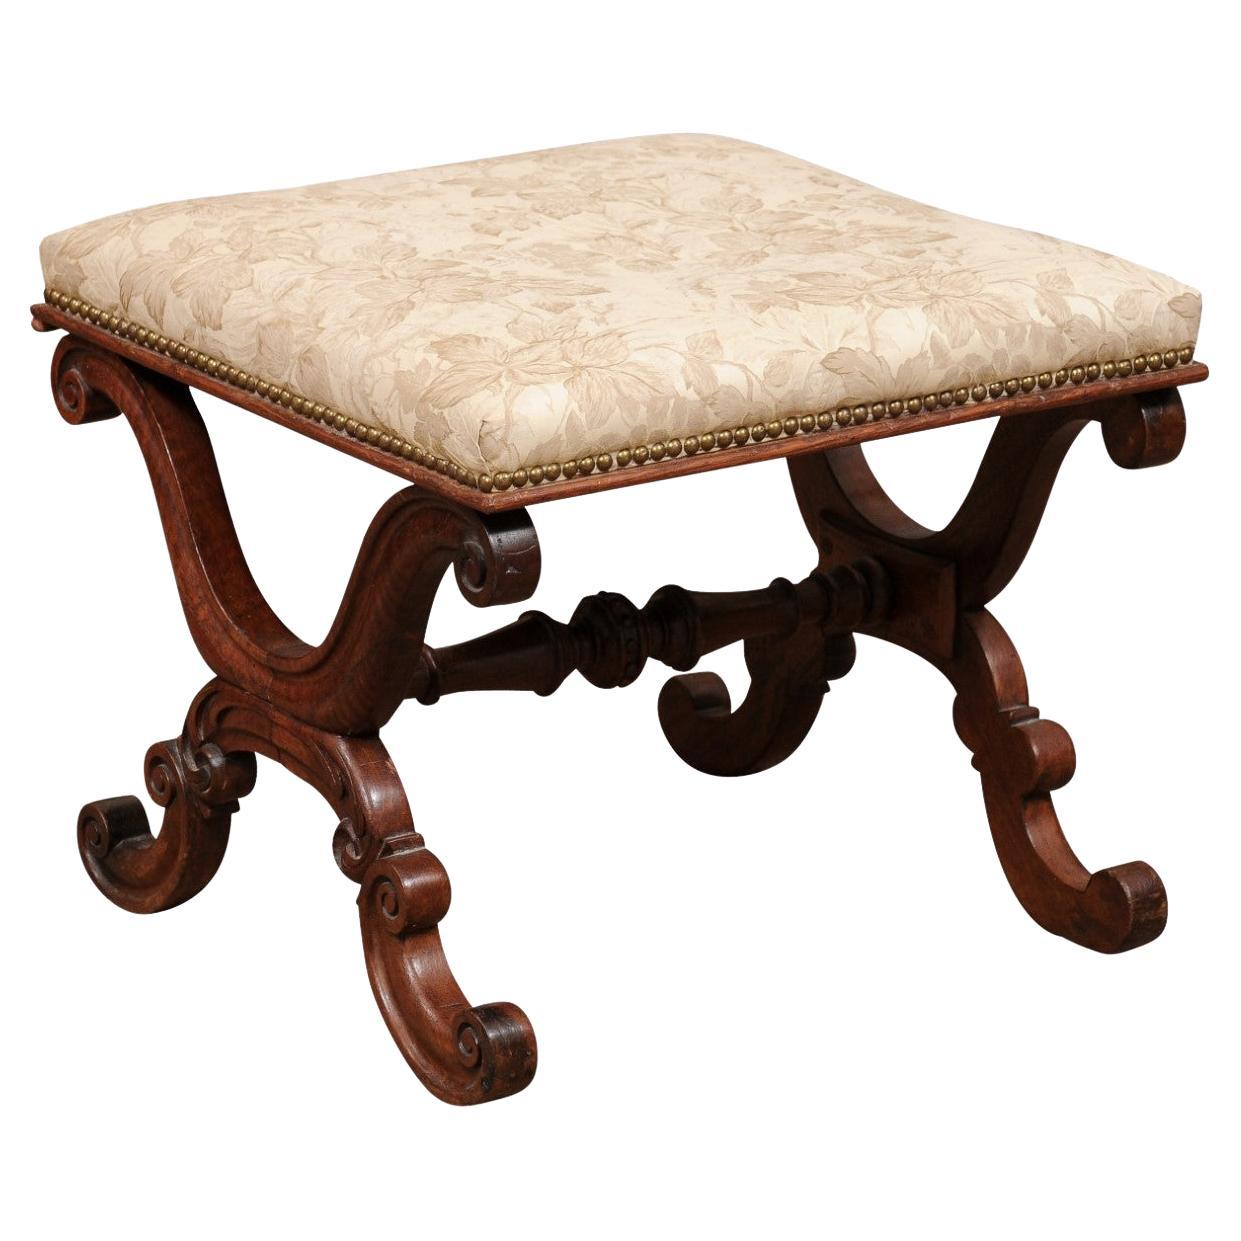 English William IV Mahogany X Form Bench with Upholstered Seat, ca. 1830